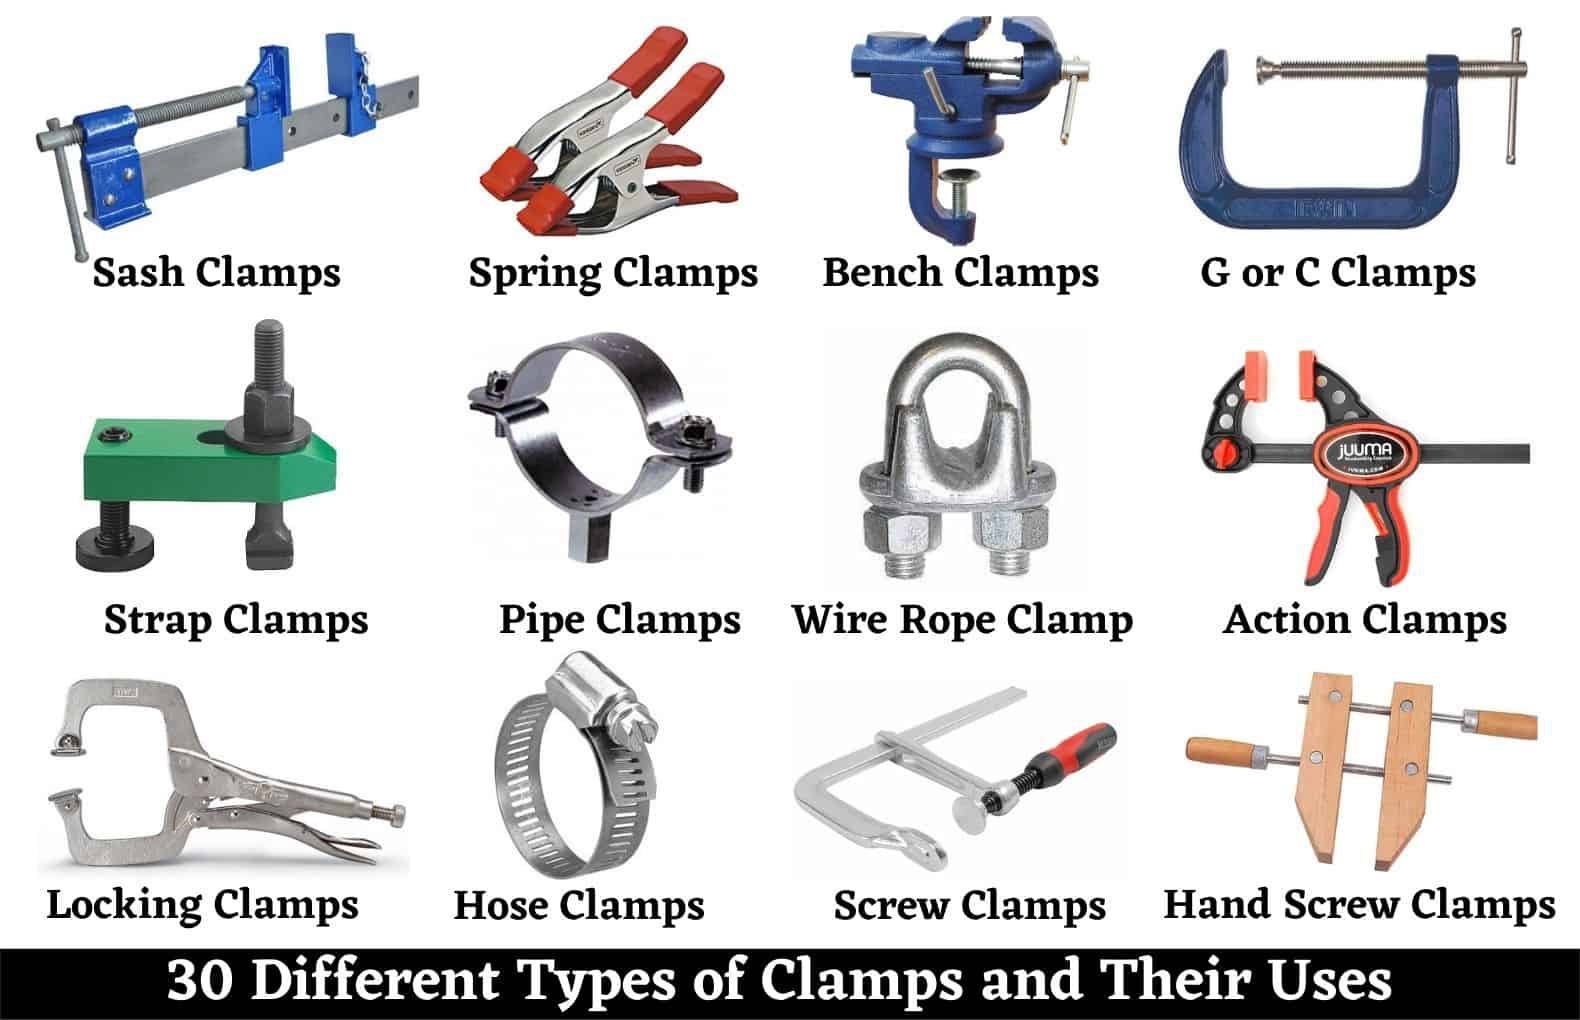 Mastering Clamps: A Visual Guide To Different Types And Their